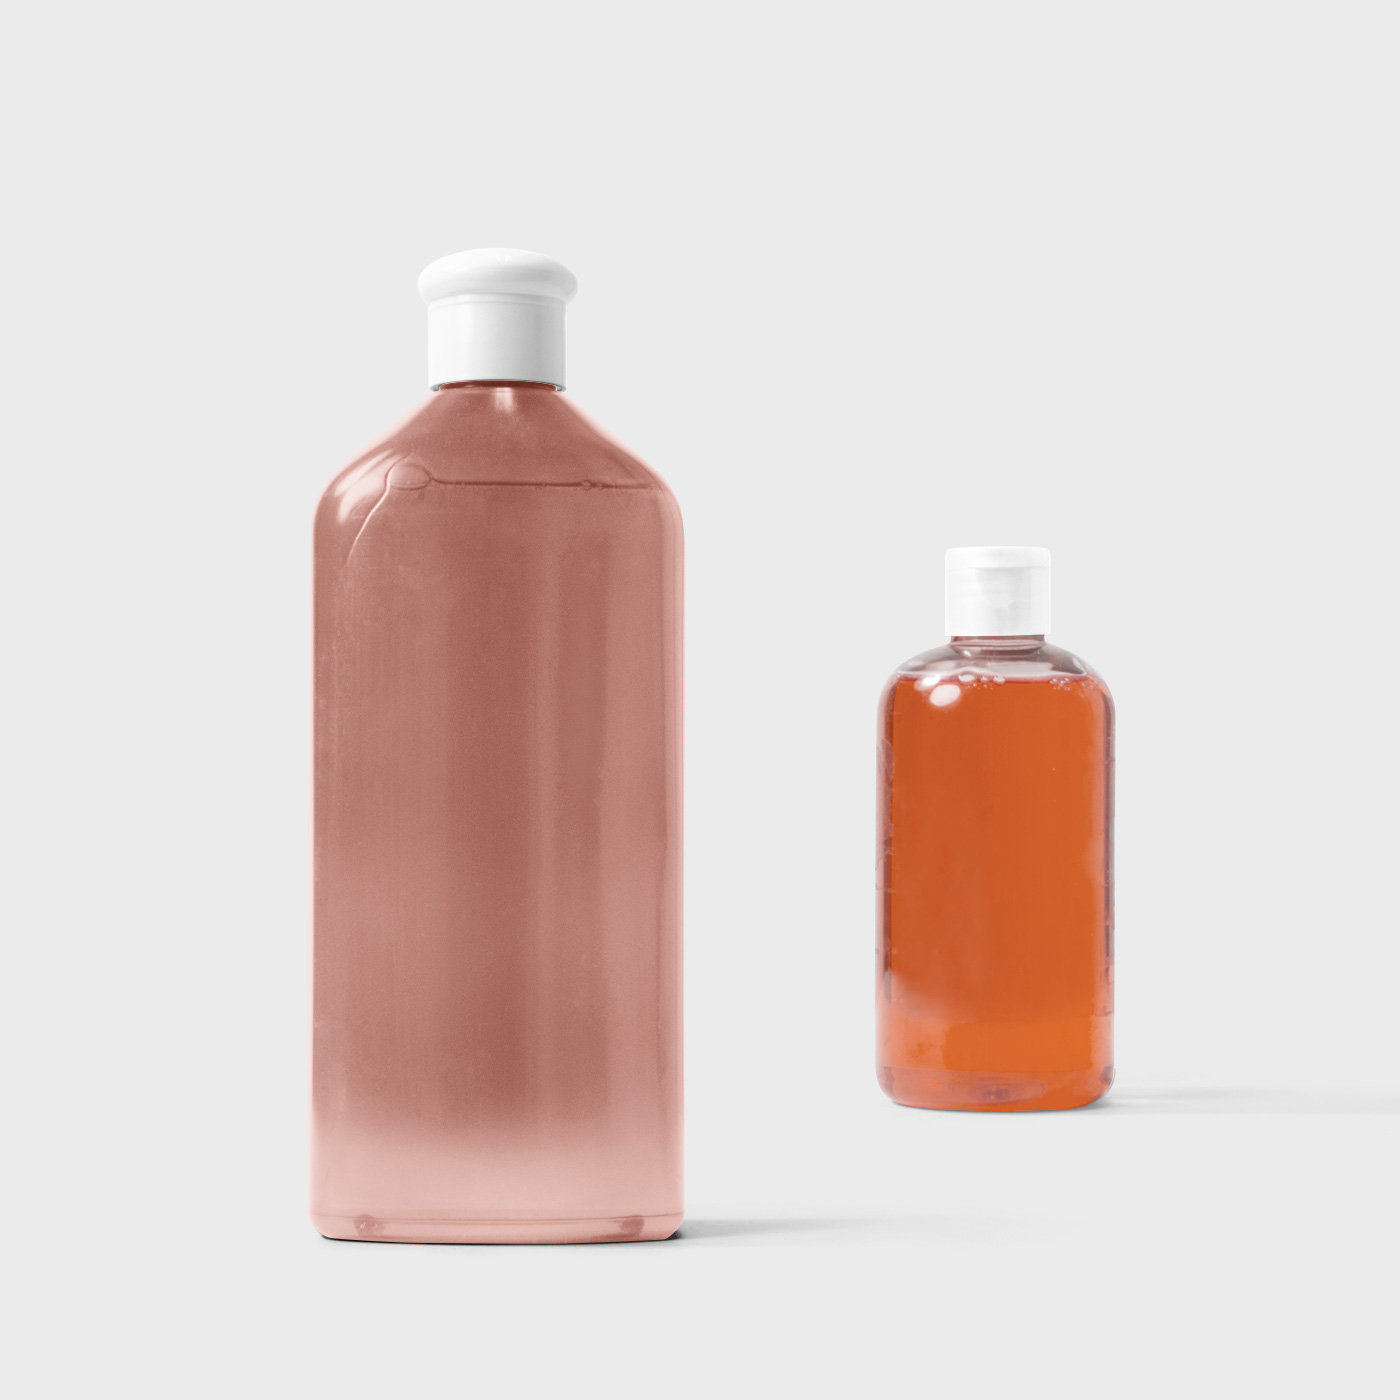 Front View of Big and Small Shampoo Bottle Mockup FREE PSD